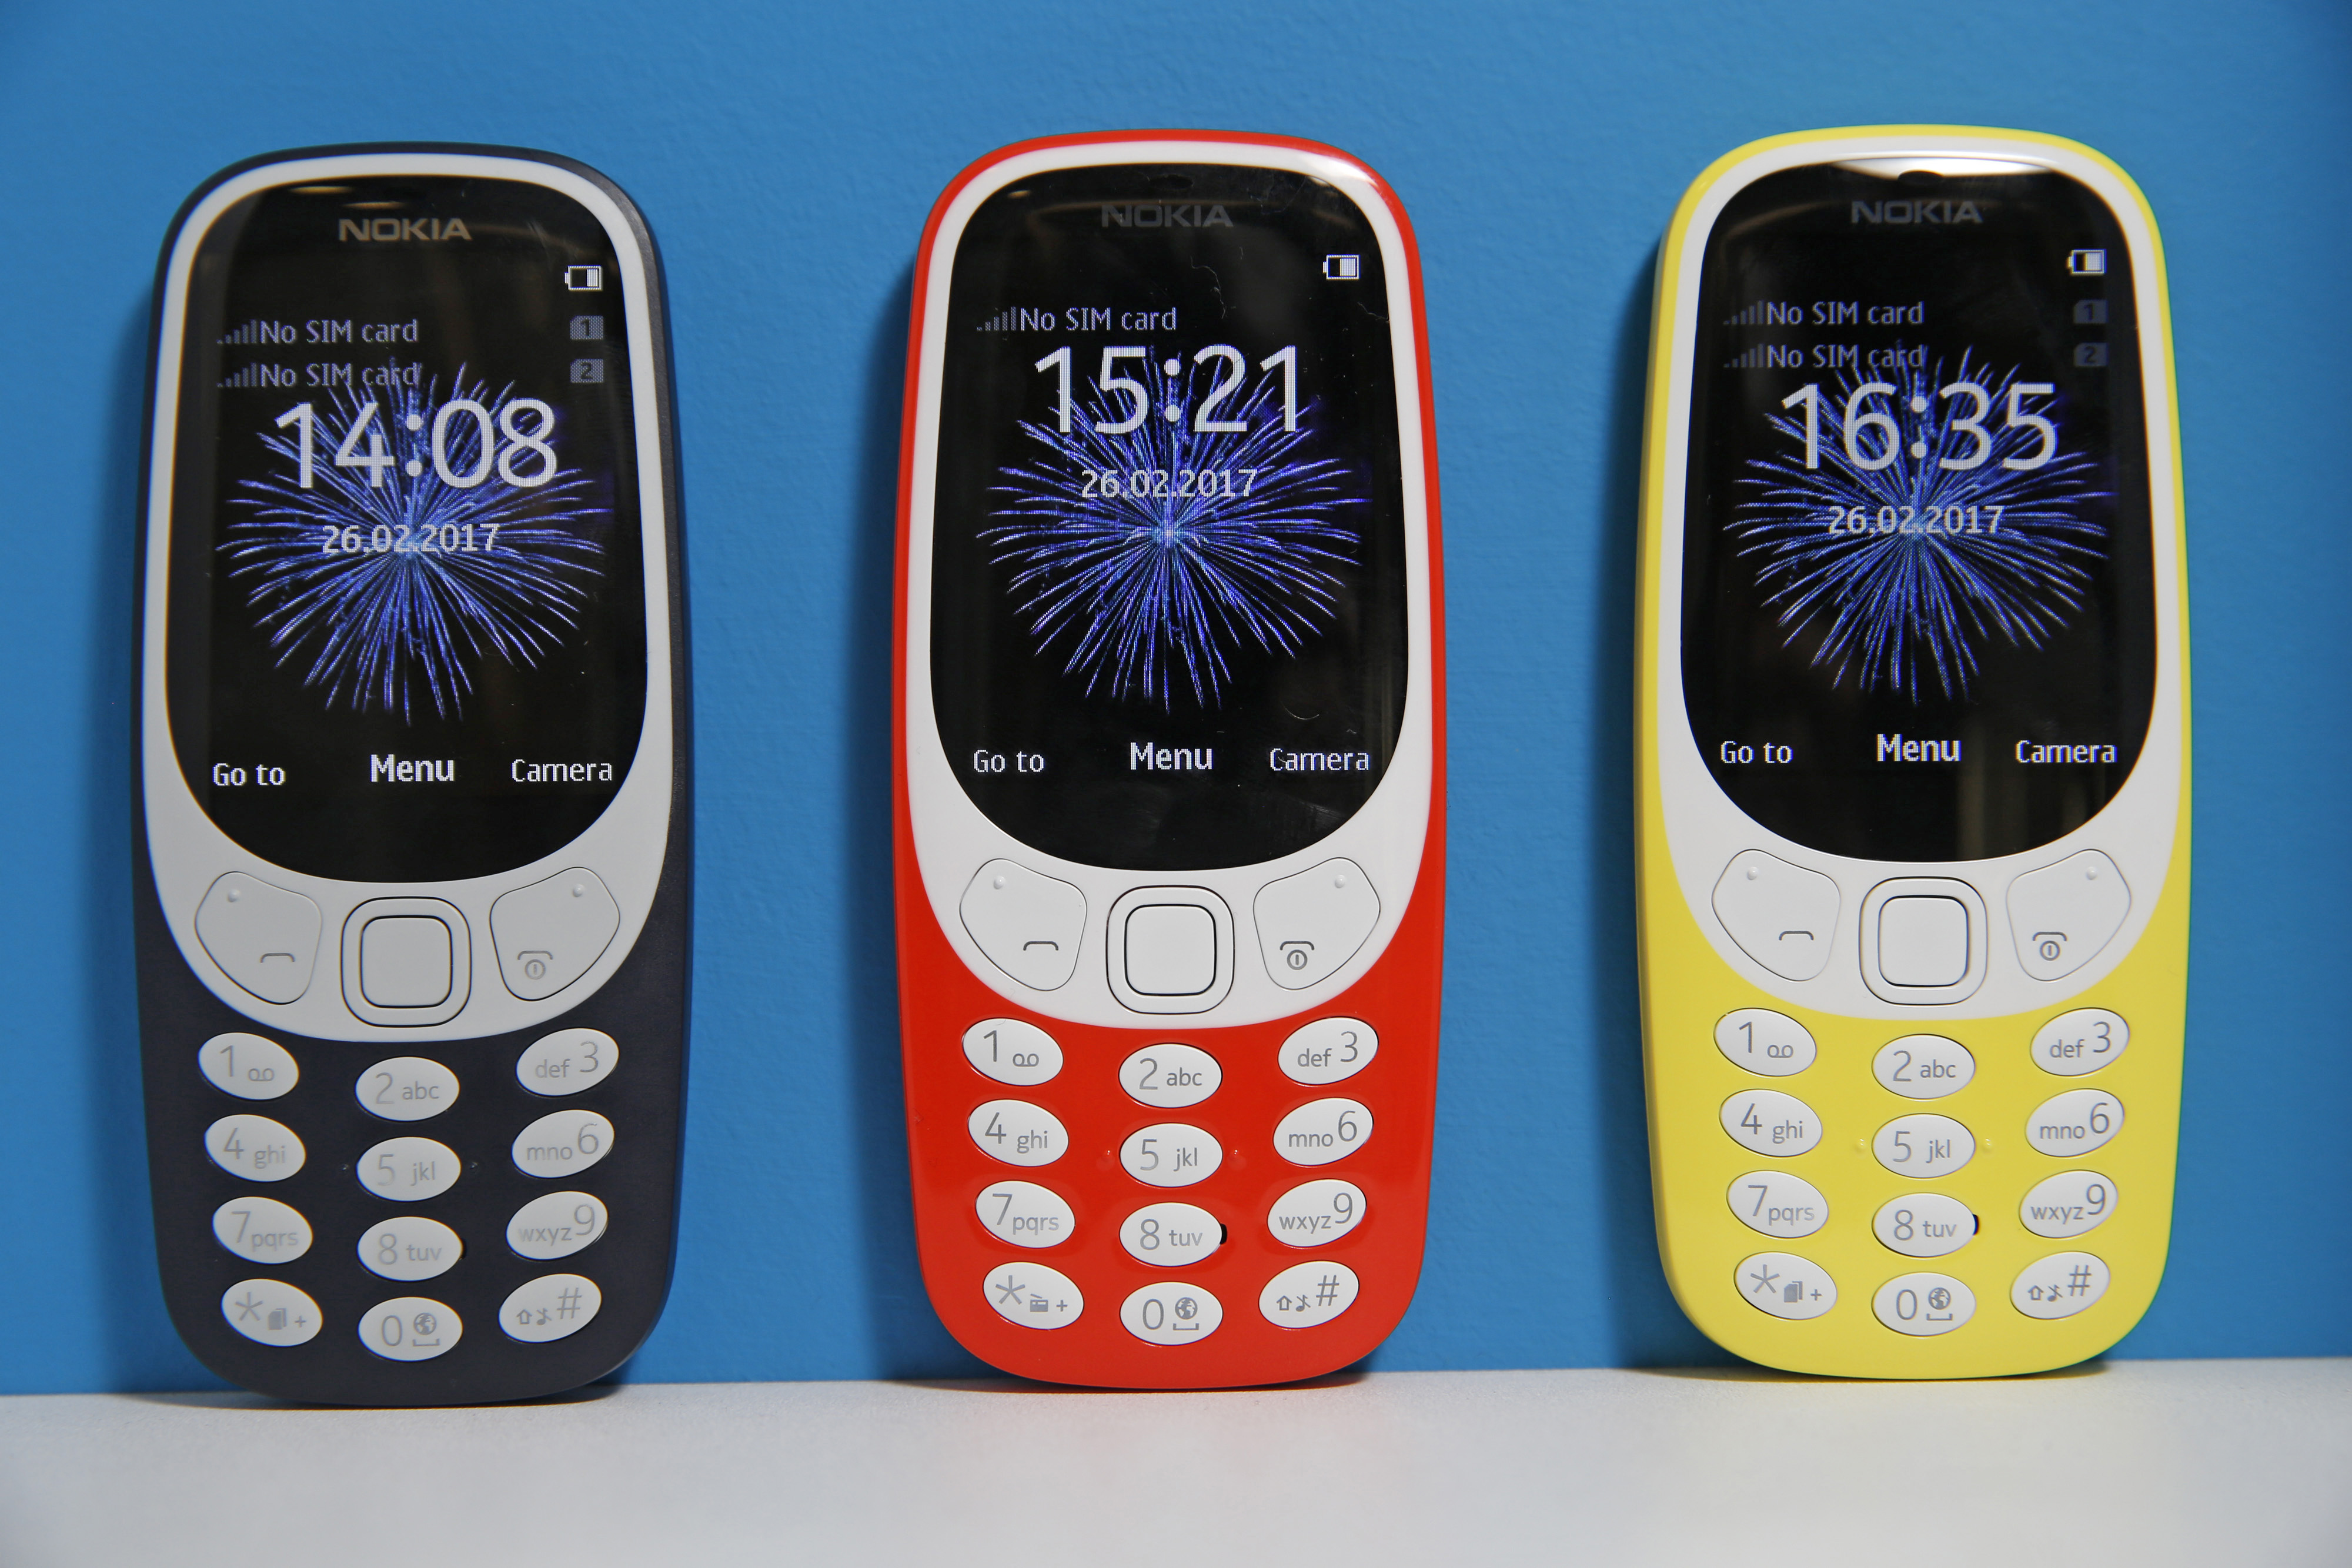 The new Nokia 3310 mobile phone, developed by HMD Global OY, on display during in London, on Feb. 24, 2017. (Luke MacGregor—Bloomberg/Getty Images)